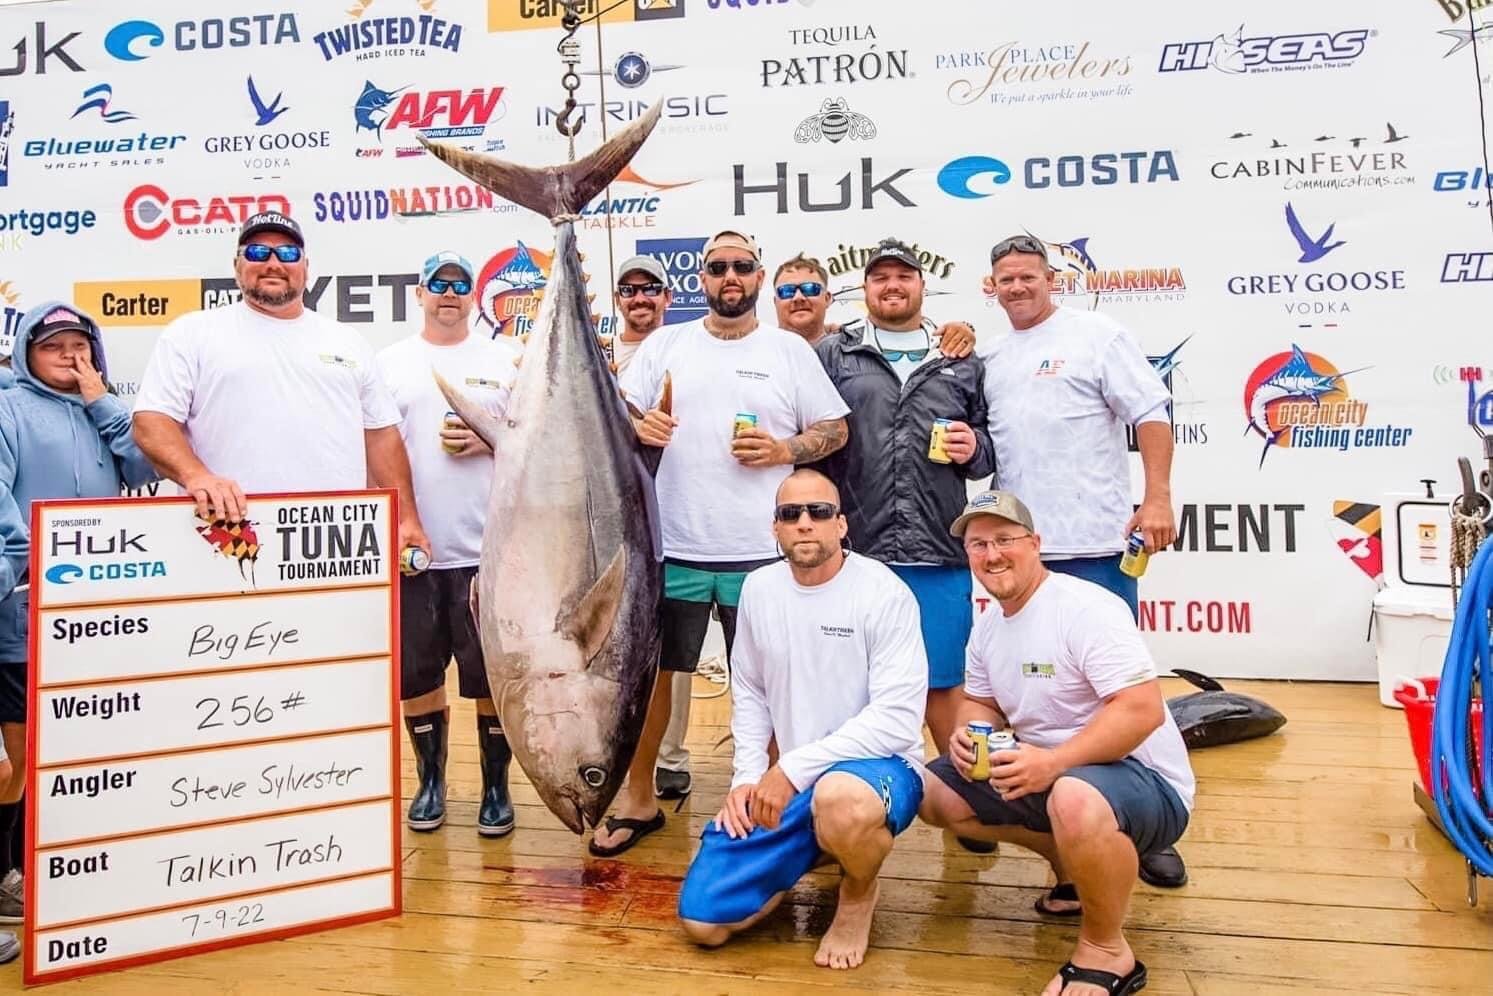 Pasadena's Chris Little (top row, right) captained the Talkin’ Trash crew that placed first in the Heaviest Stringer category and second place in the Single Largest category.